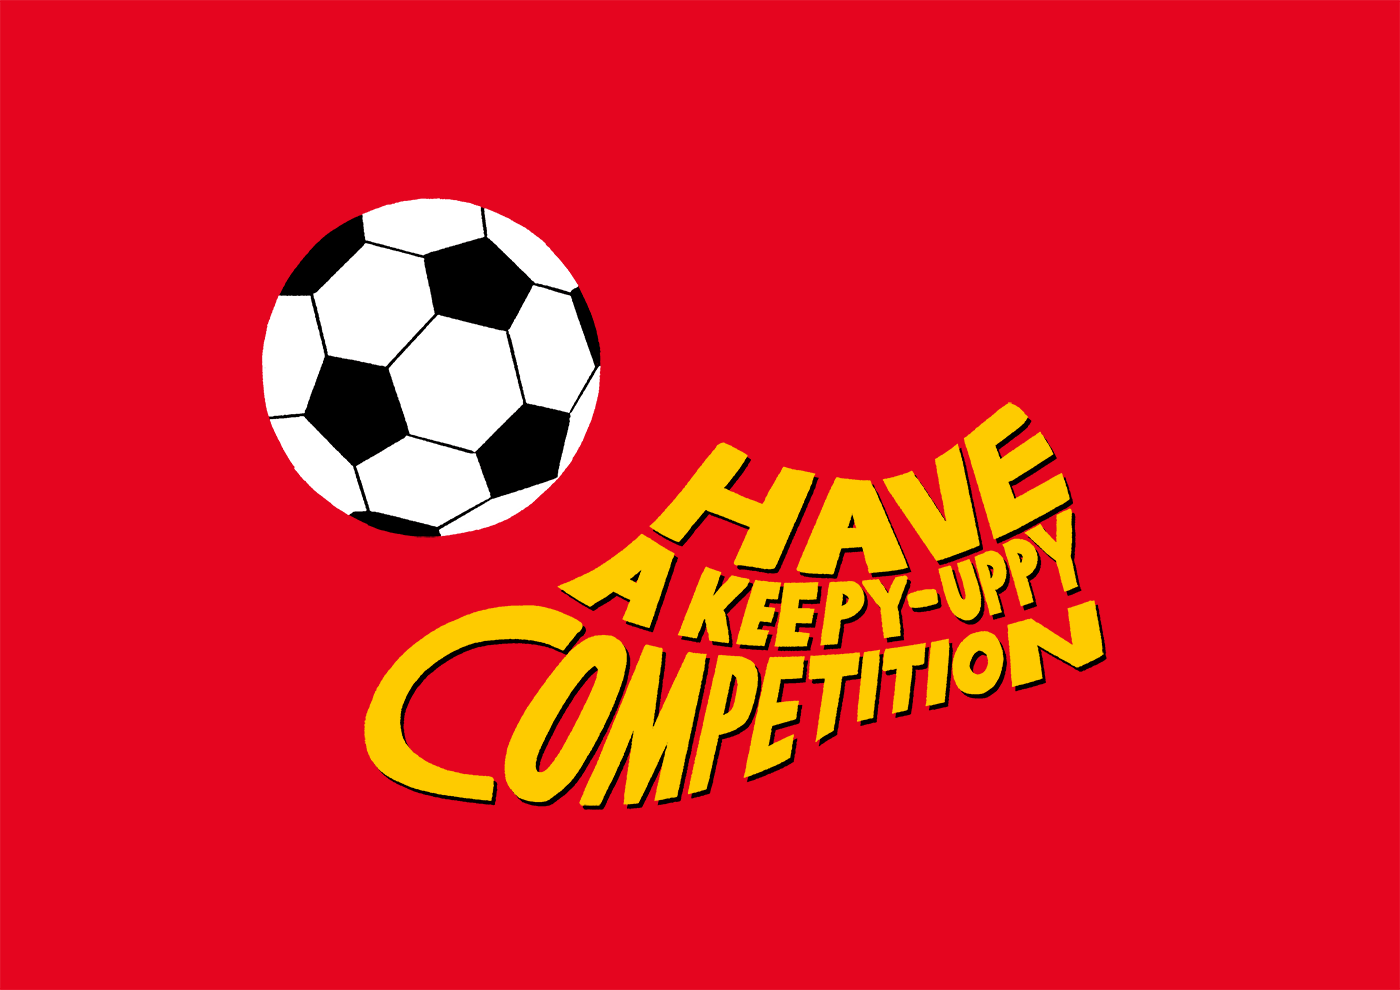 Have a keepy uppy competition